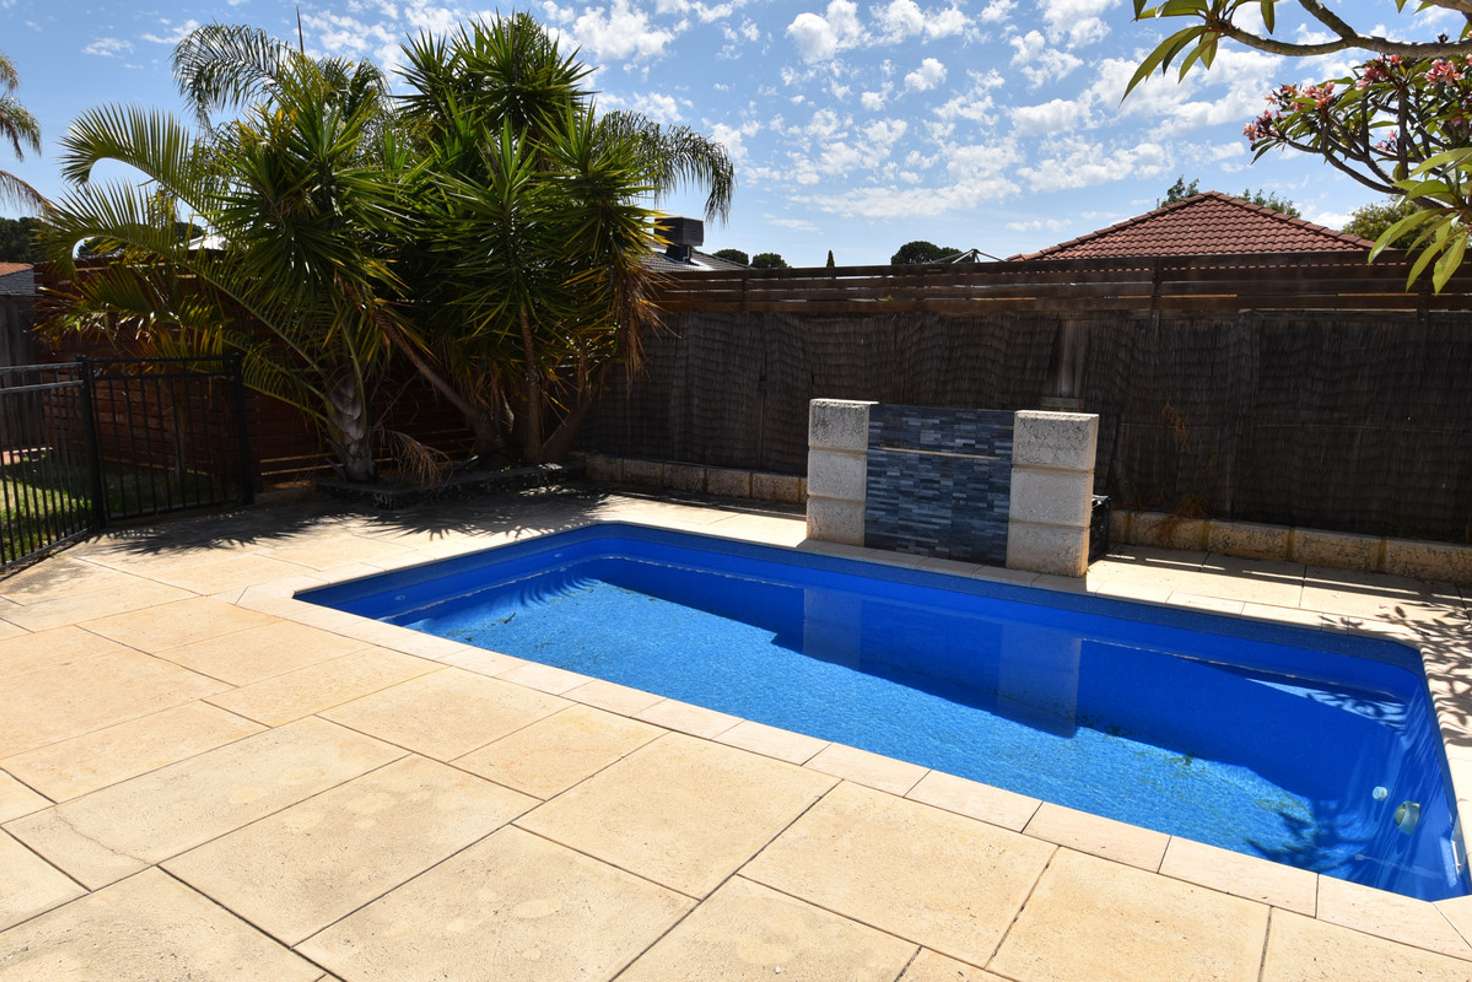 Main view of Homely house listing, 71 Vaucluse Crescent, Ellenbrook WA 6069